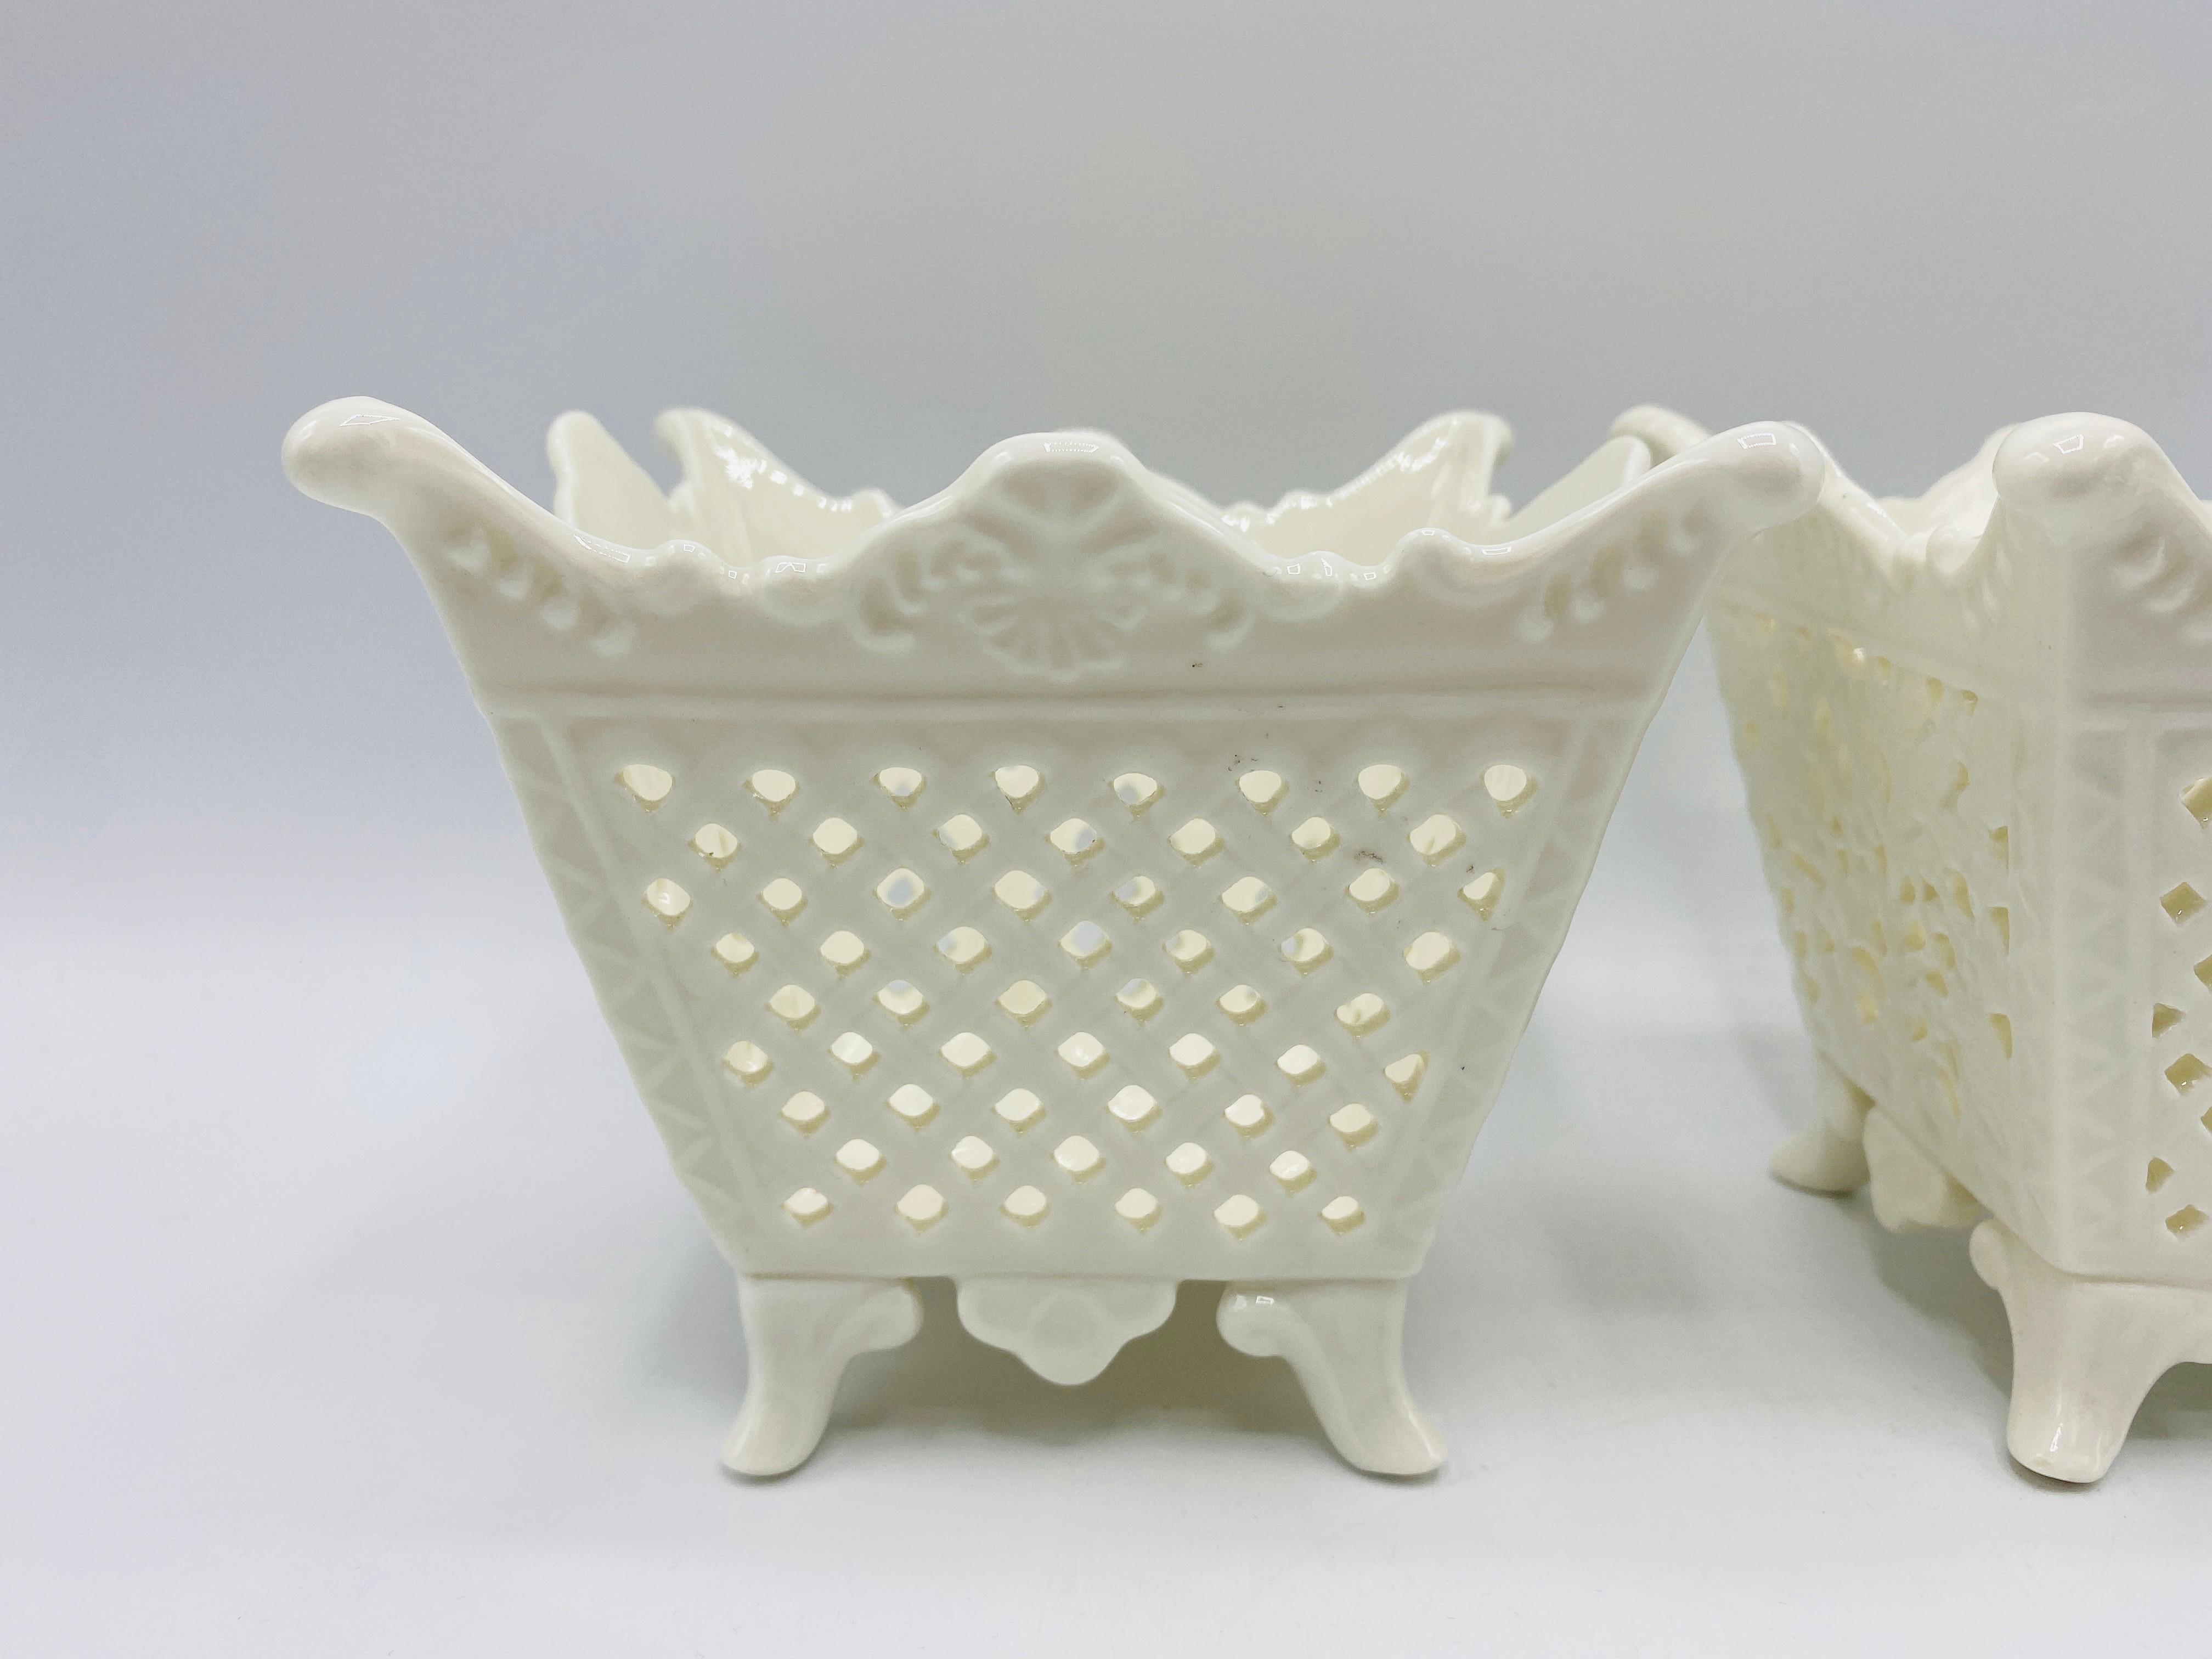 Listed is an absolutely fabulous, pair of 1960s Italian pierced porcelain cachepot planters. The pair have a gorgeous, overall scalloped shape, with a pierced lattice weave on two of four sides, and a pierced floral motif on the other two of four